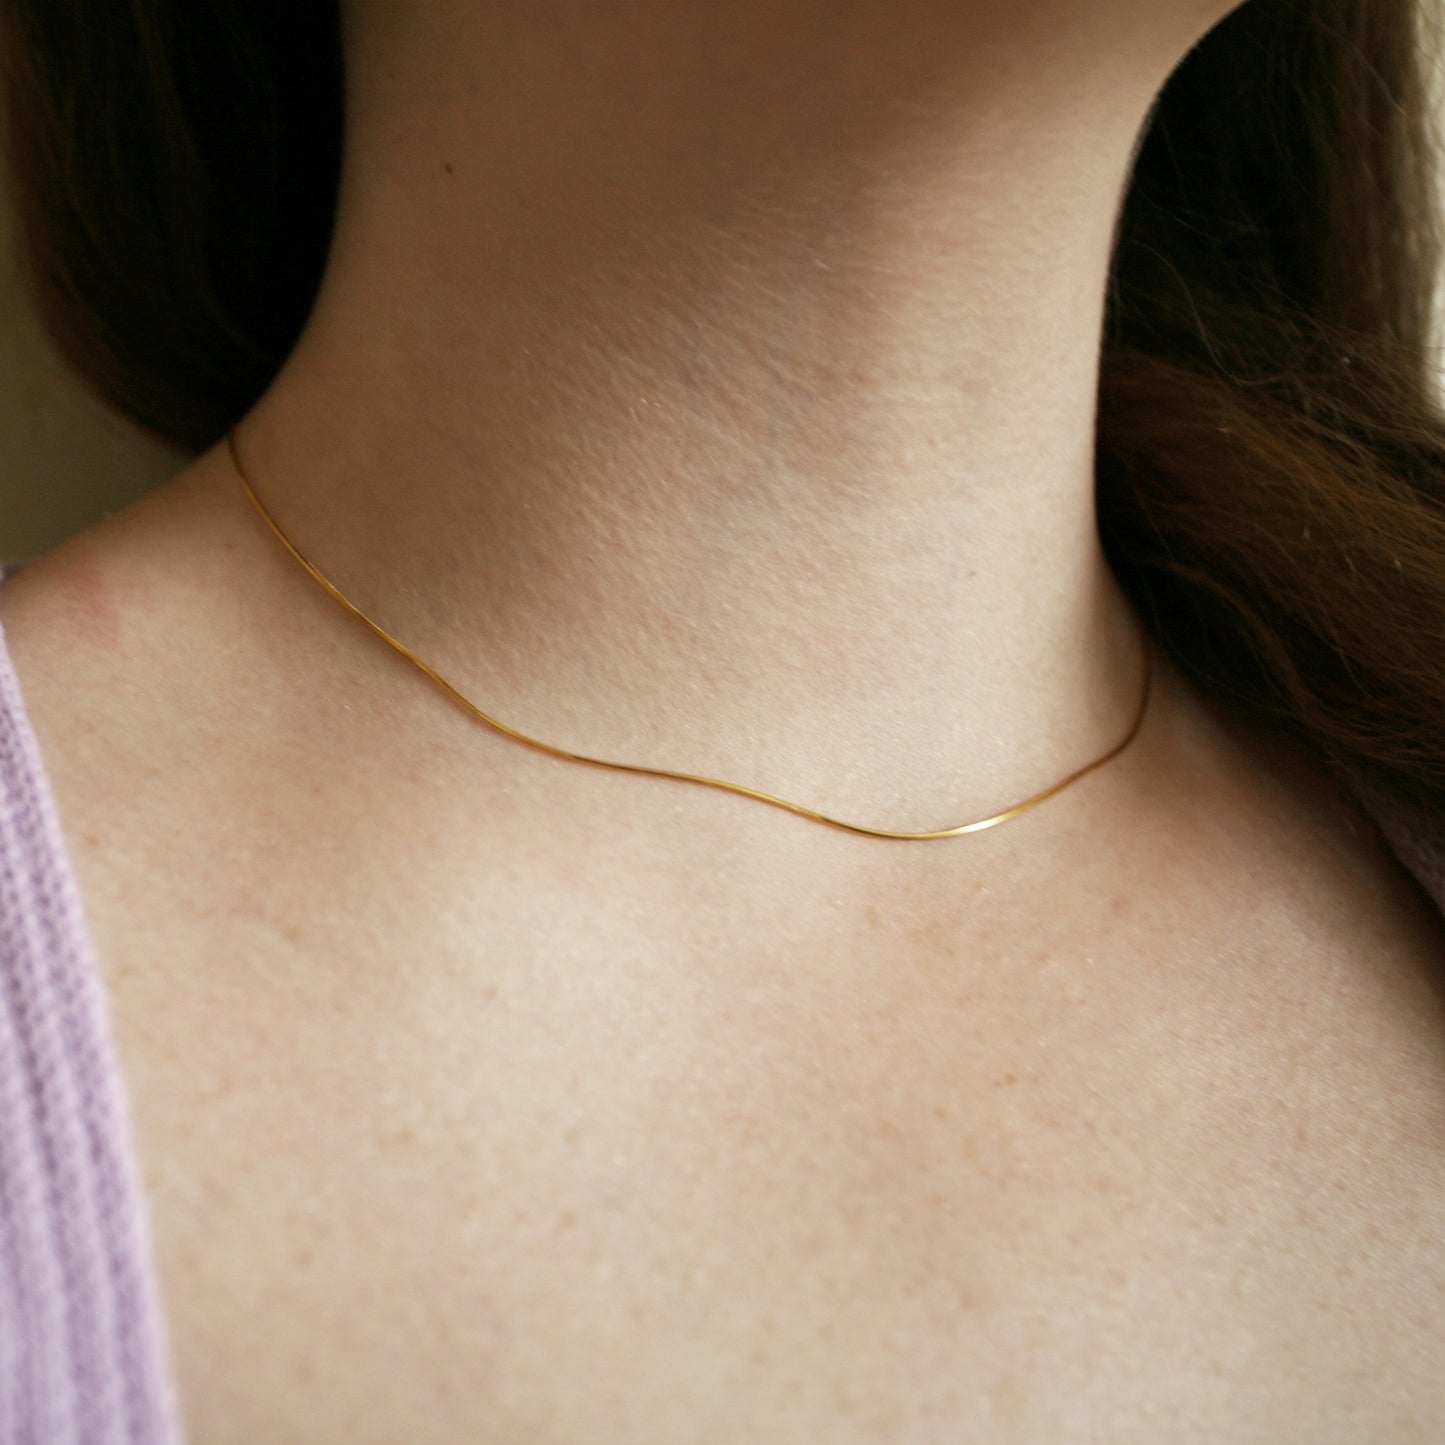 Plain Choker Chain in Sterling Silver, Silver or Gold, Plain Snake Chain Necklace, Skinny and Delicate Collar Necklace